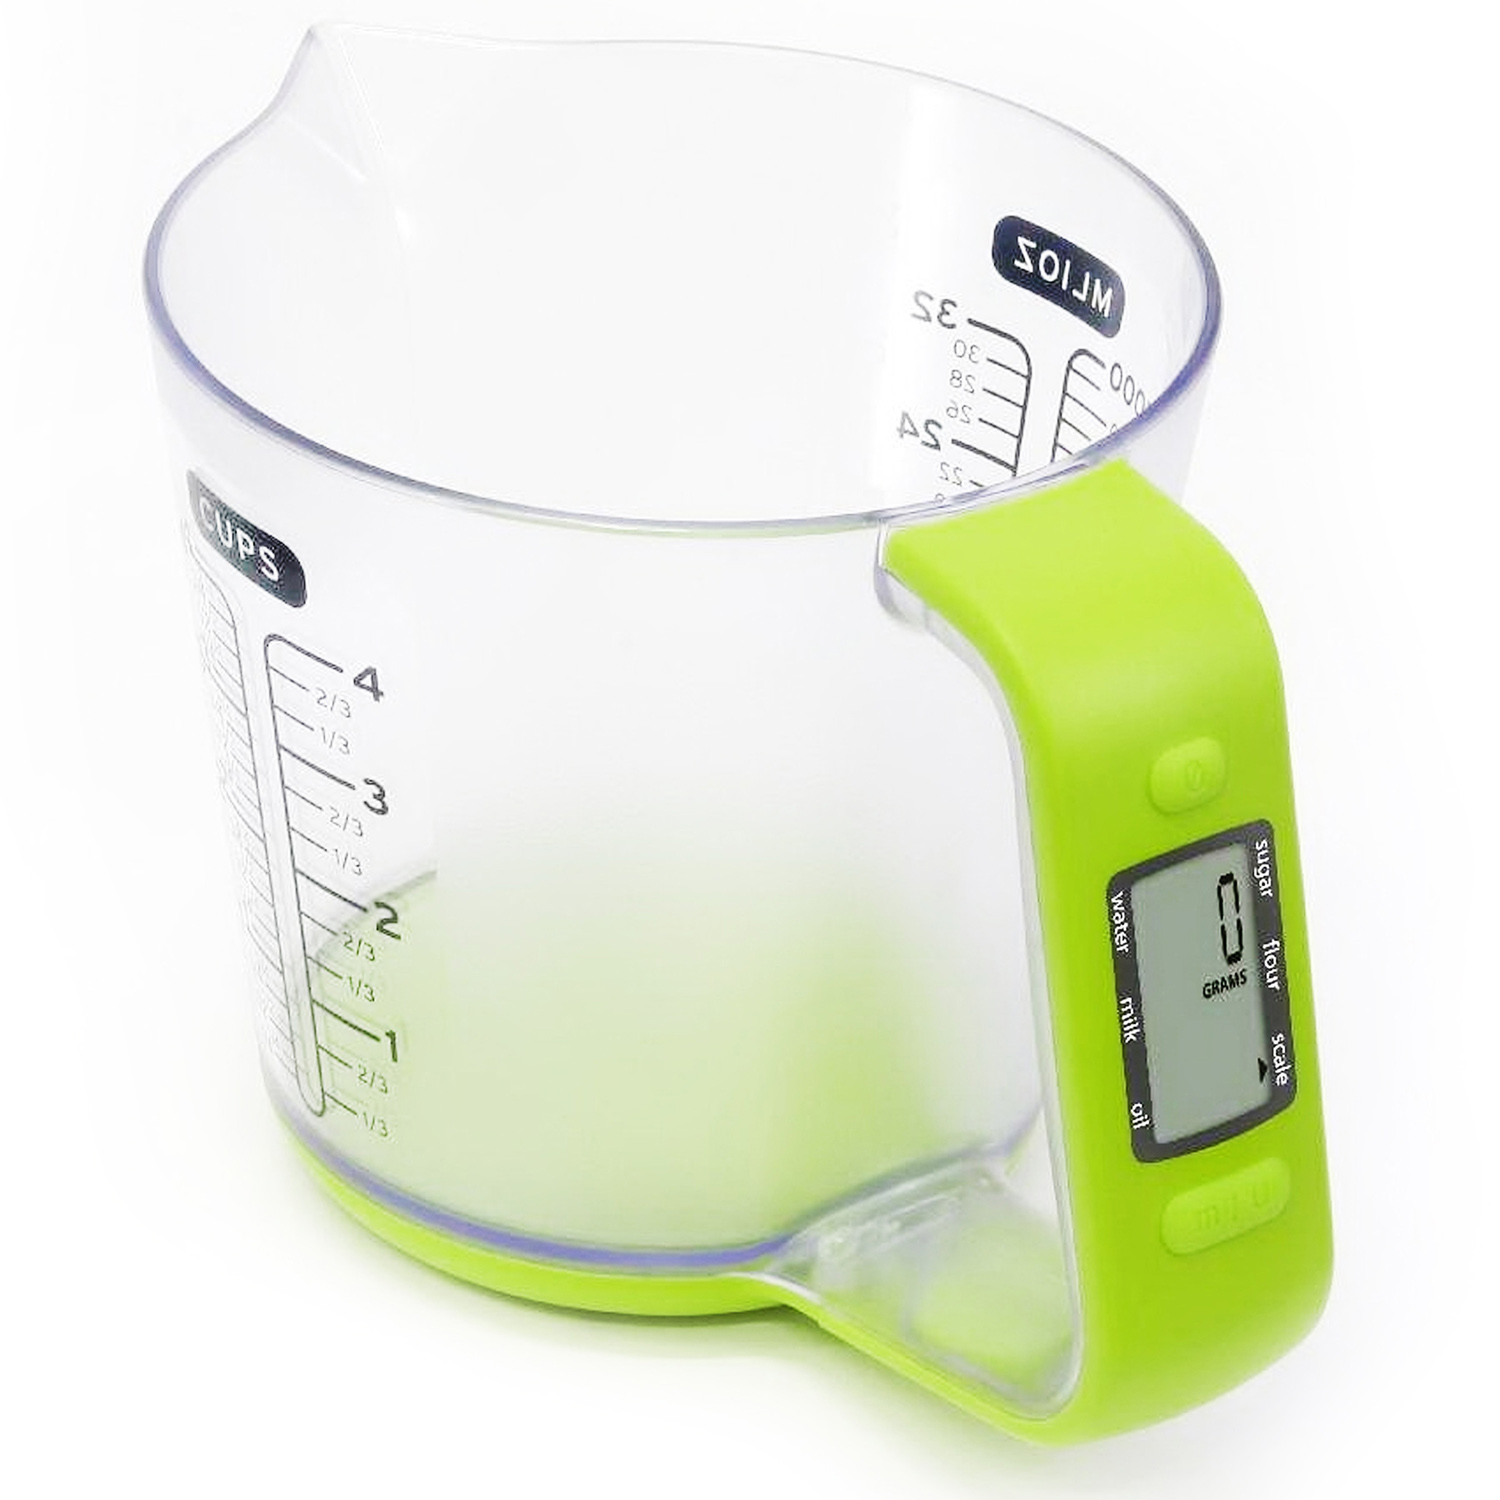 https://www.yorkshirepudd.co.uk/wp-content/uploads/2013/07/Digital-Scales-Measuring-Jug-product-shot-rrp-%C2%A319.99-available-from-www.find-me-a-gift.co_.uk_.jpg